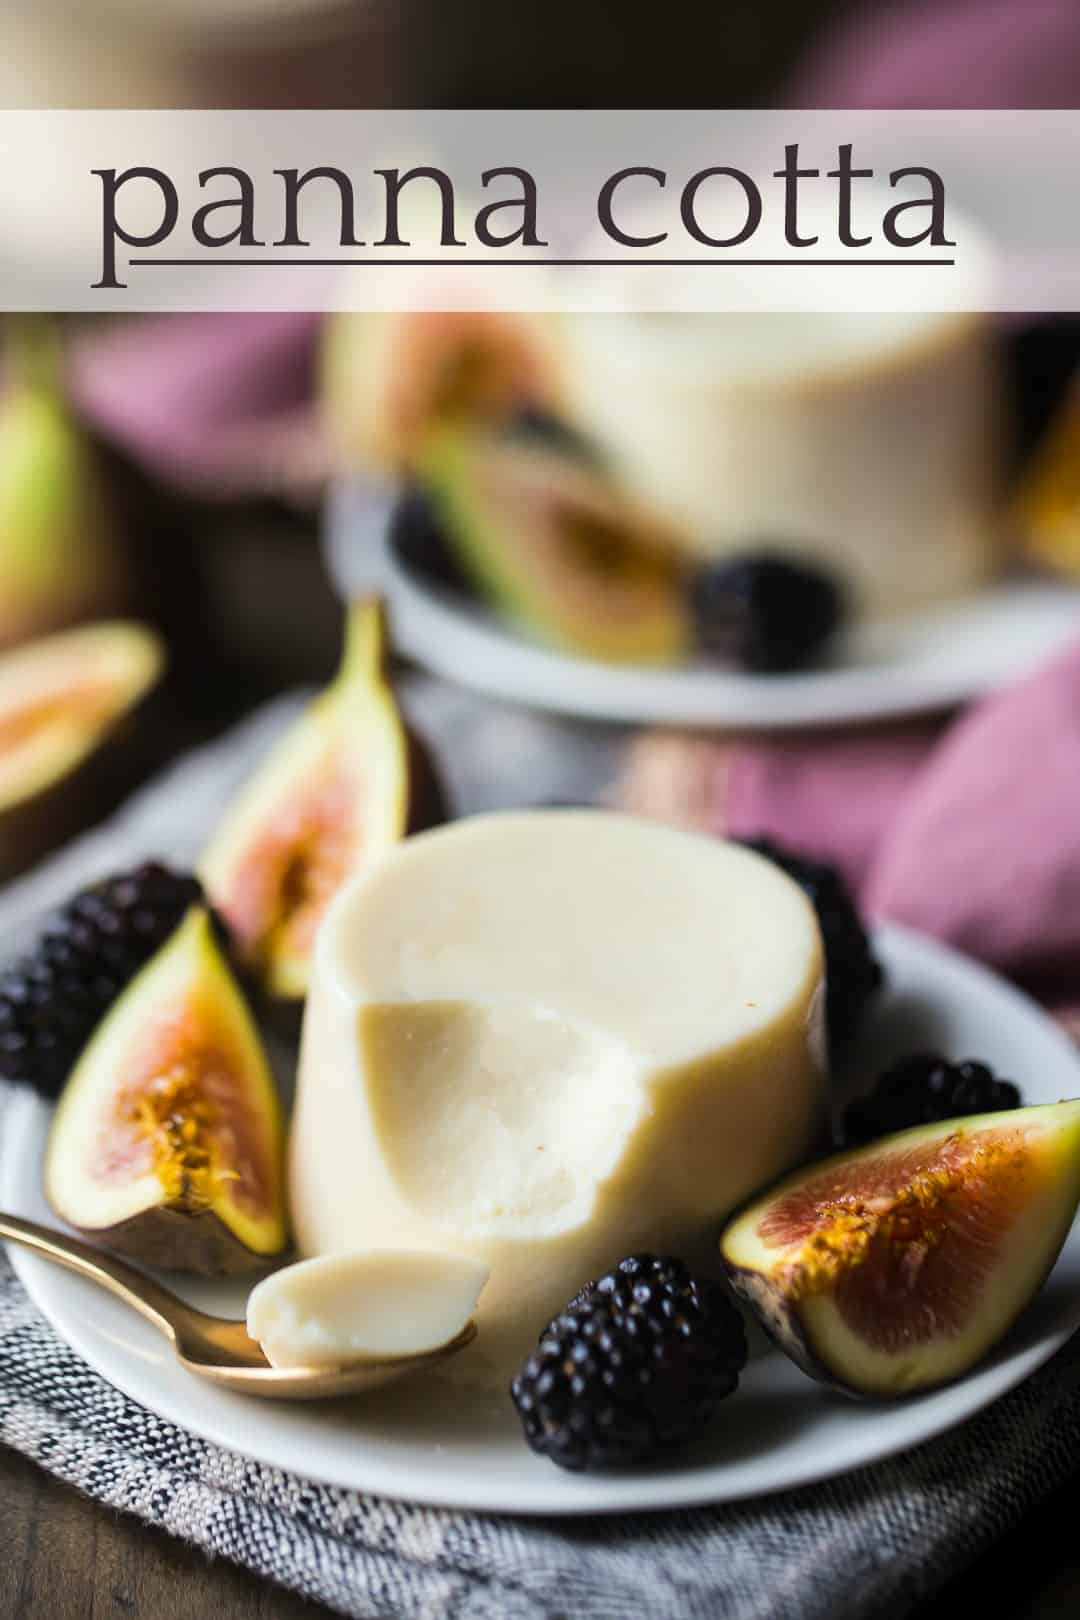 Panna cotta recipe, prepared and turned out onto a small plate along with fresh figs and blackberries, and a text overlay above that reads "Panna Cotta."